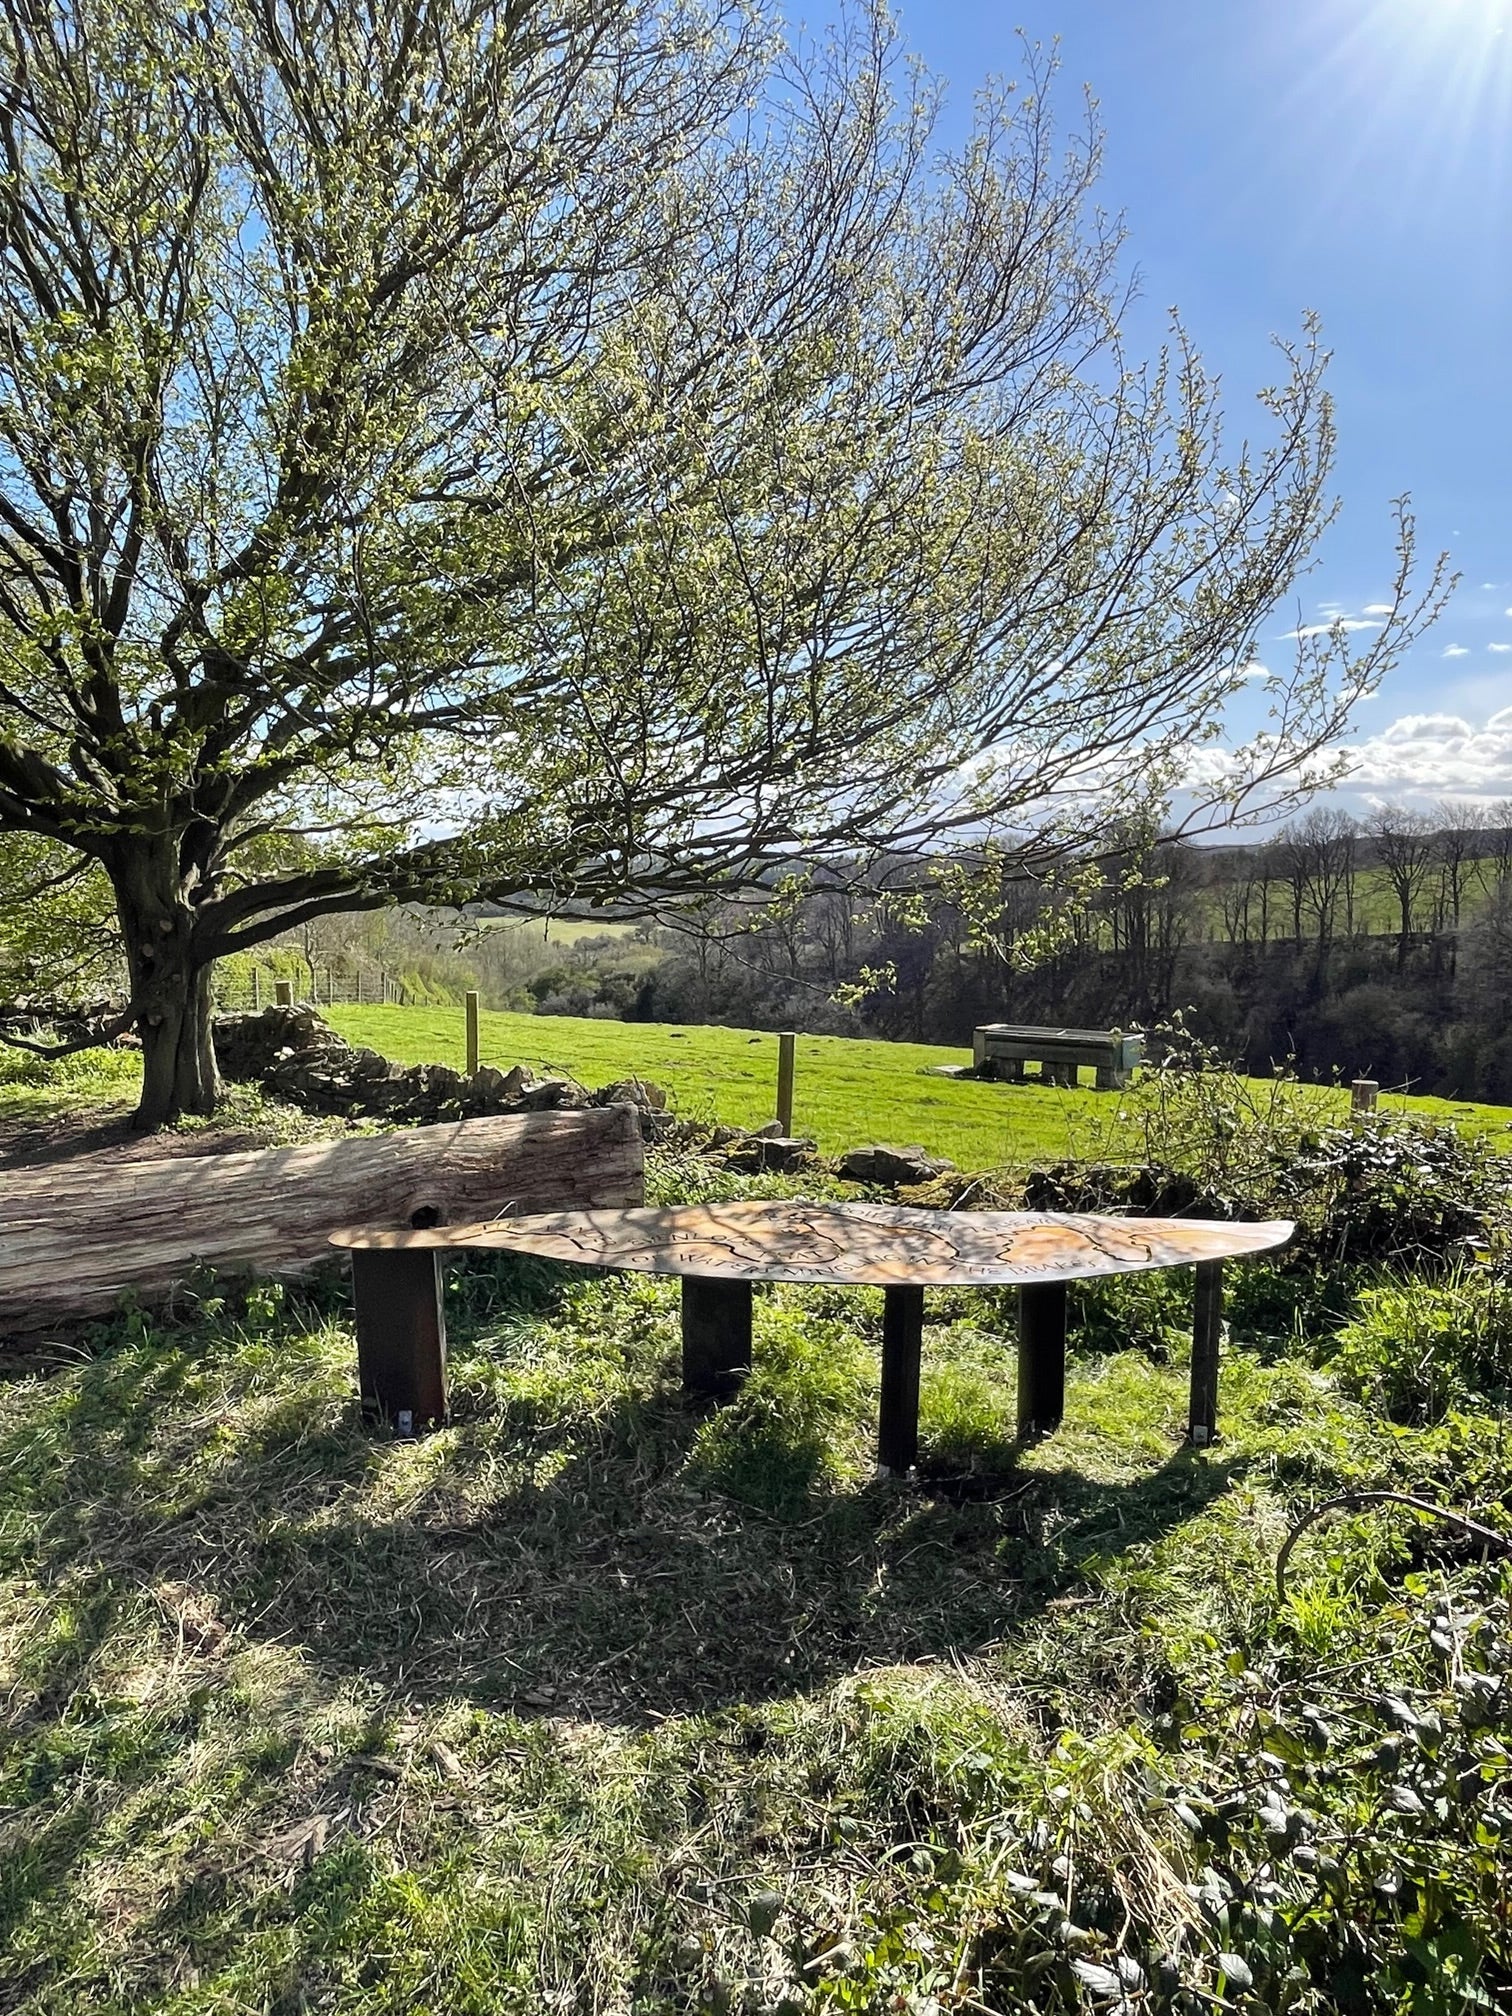 Public Art Project: Willow Leaf Bench in Stonesfield, West Oxfordshire